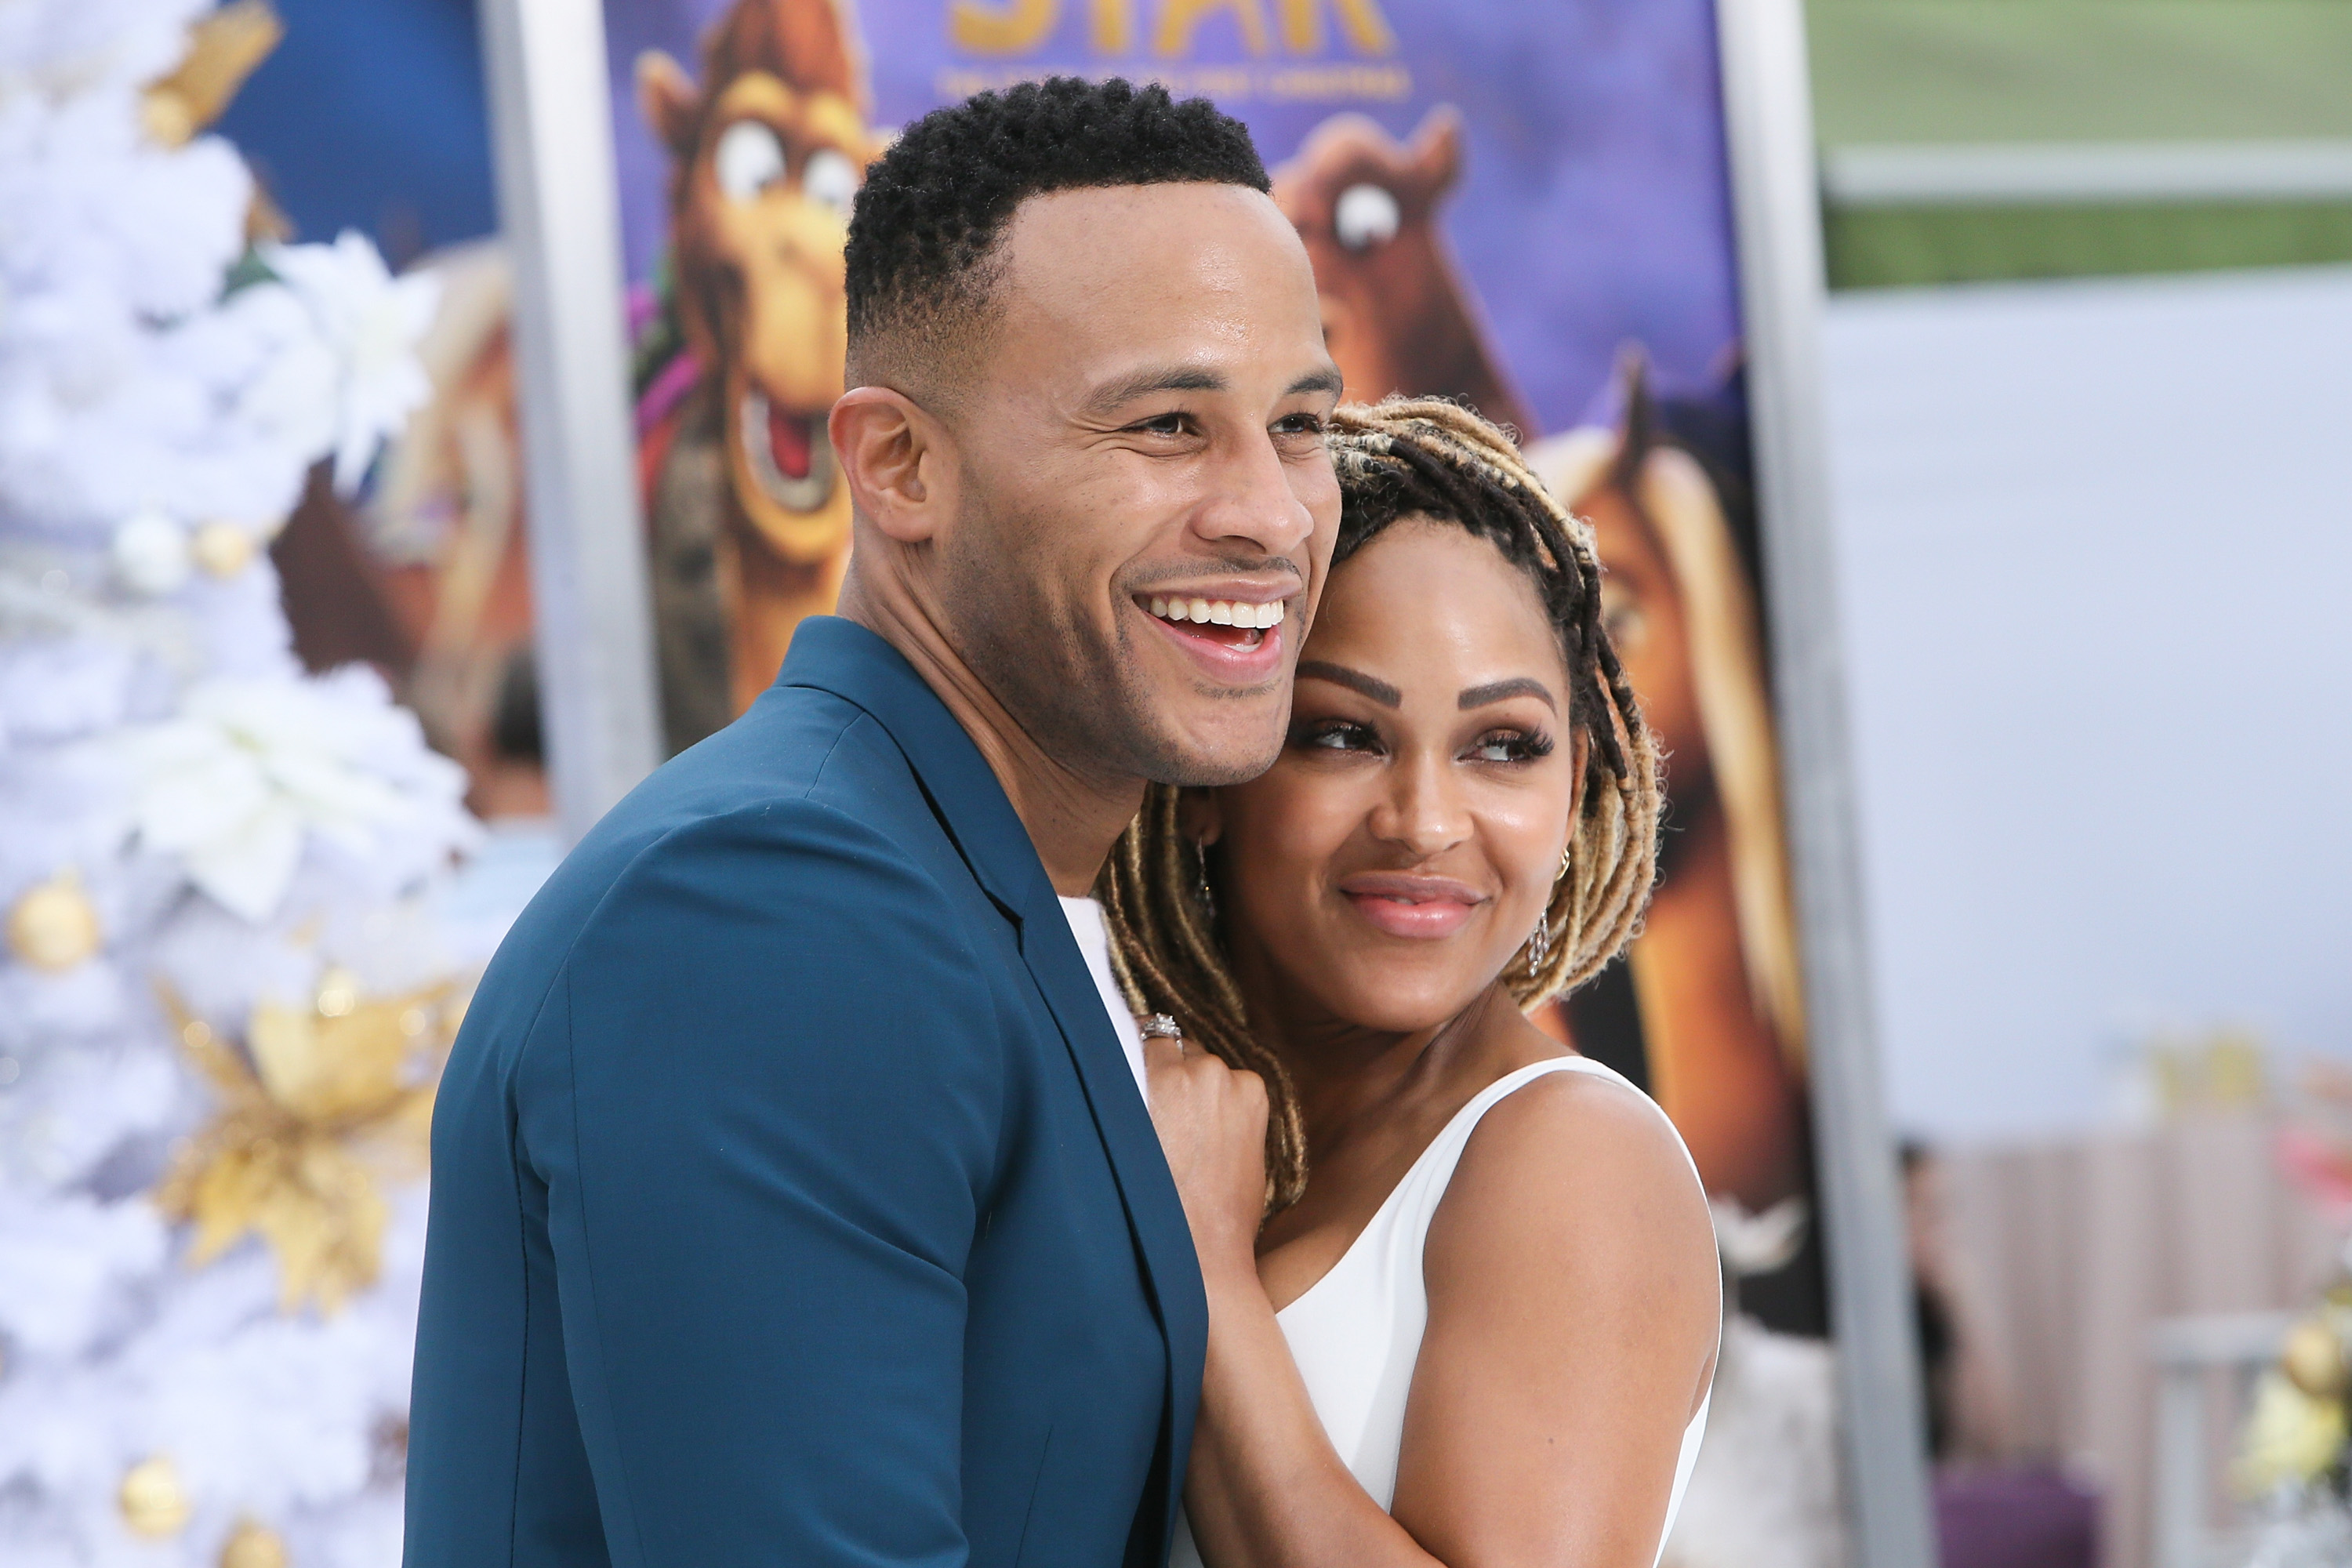 DeVon Franklin and Meagan Good at the Regency Village Theatre on November 12, 2017, in Westwood, California. | Source: Getty Images